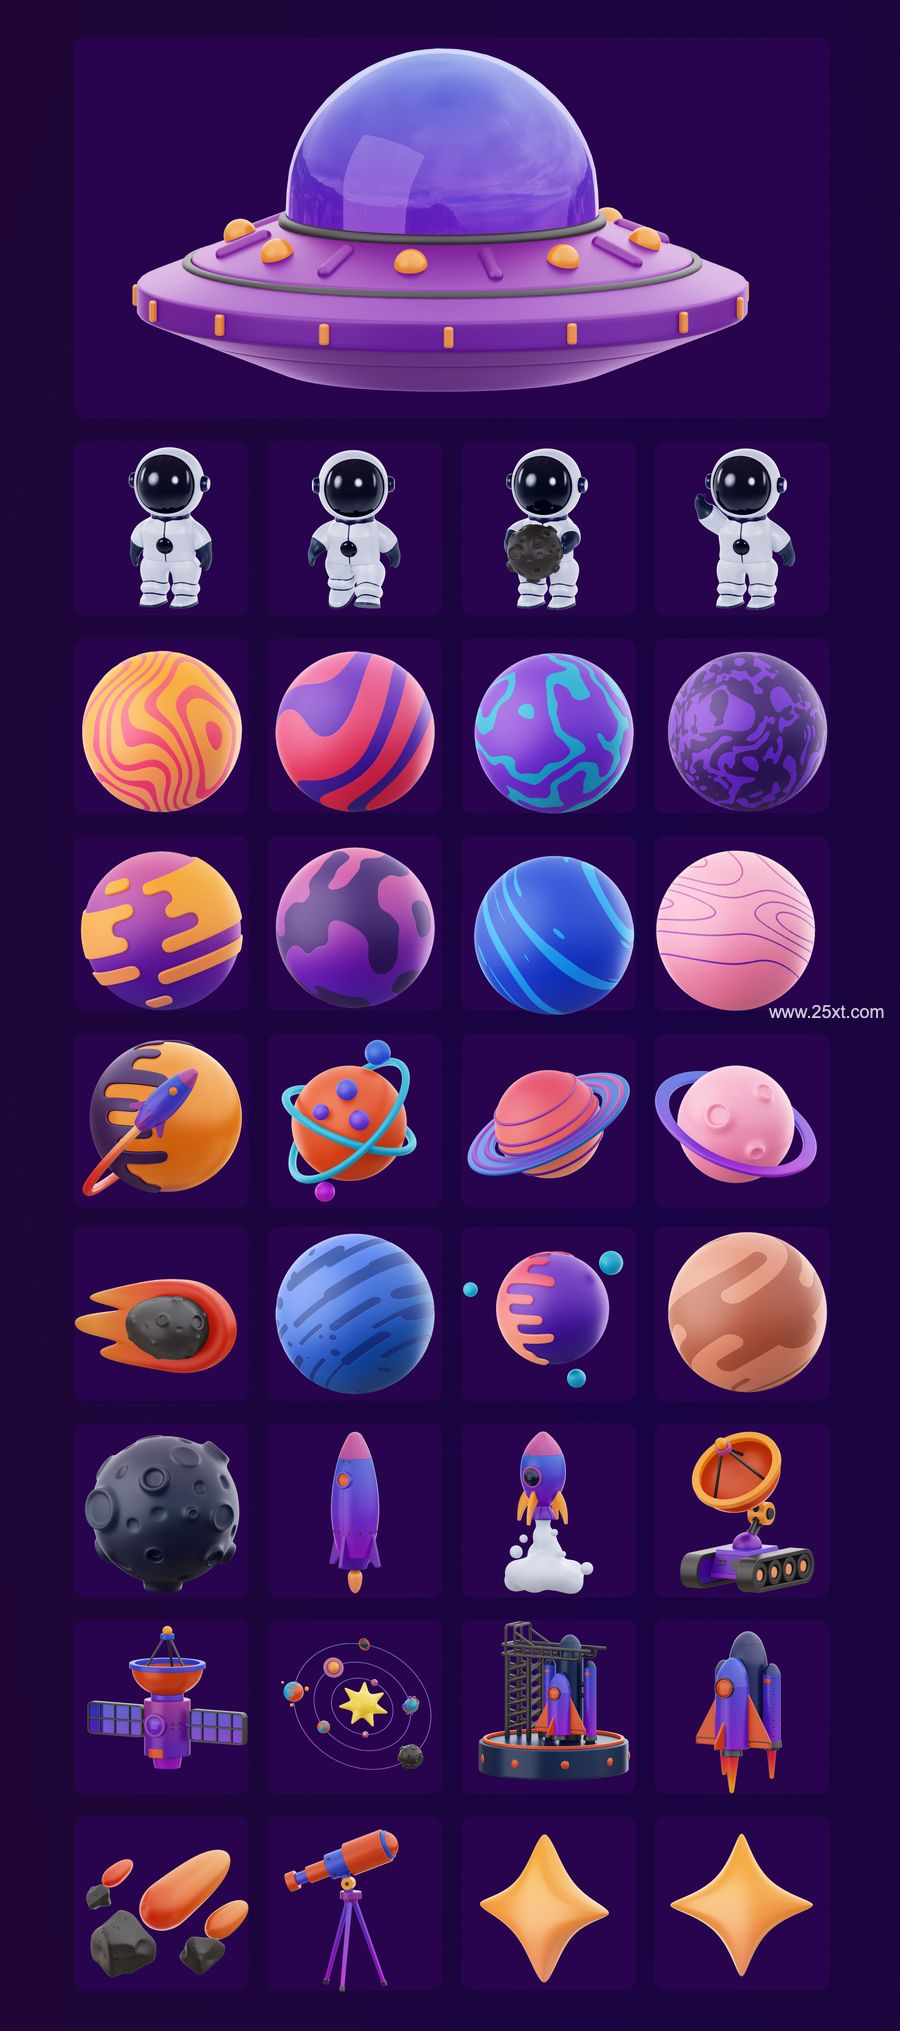 25xt-488763-Space 3D Icon Pack8.jpg